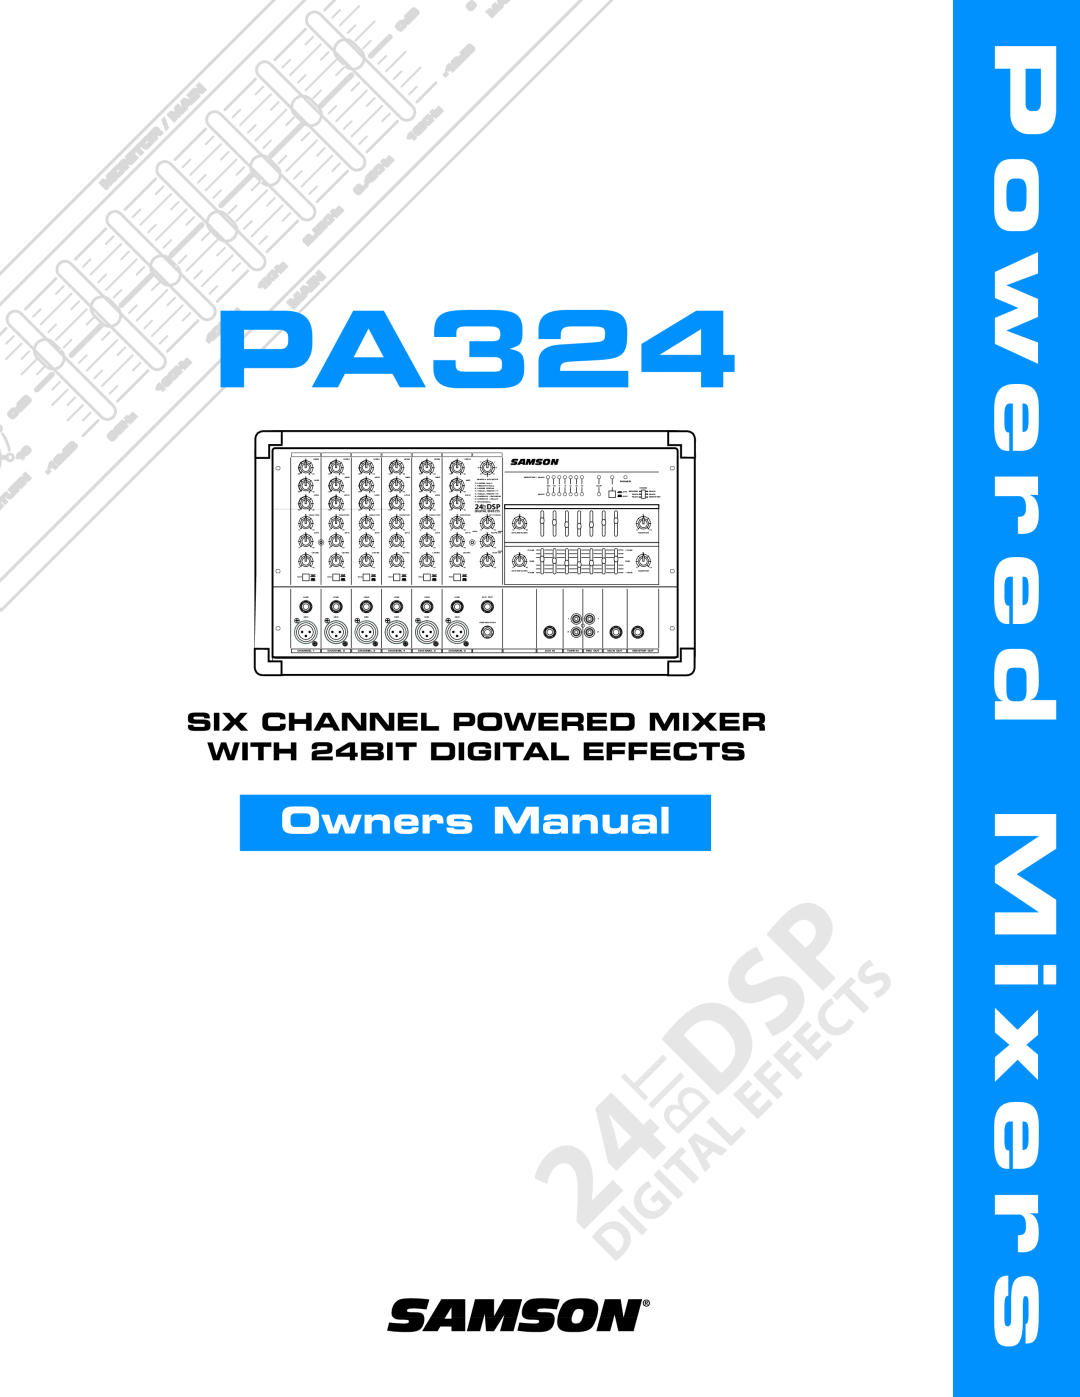 Samson PA324 owner manual Owners Manual, Digital, Effects, Six Channel Powered Mixer, WITH 24BIT DIGITAL EFFECTS, Samson 